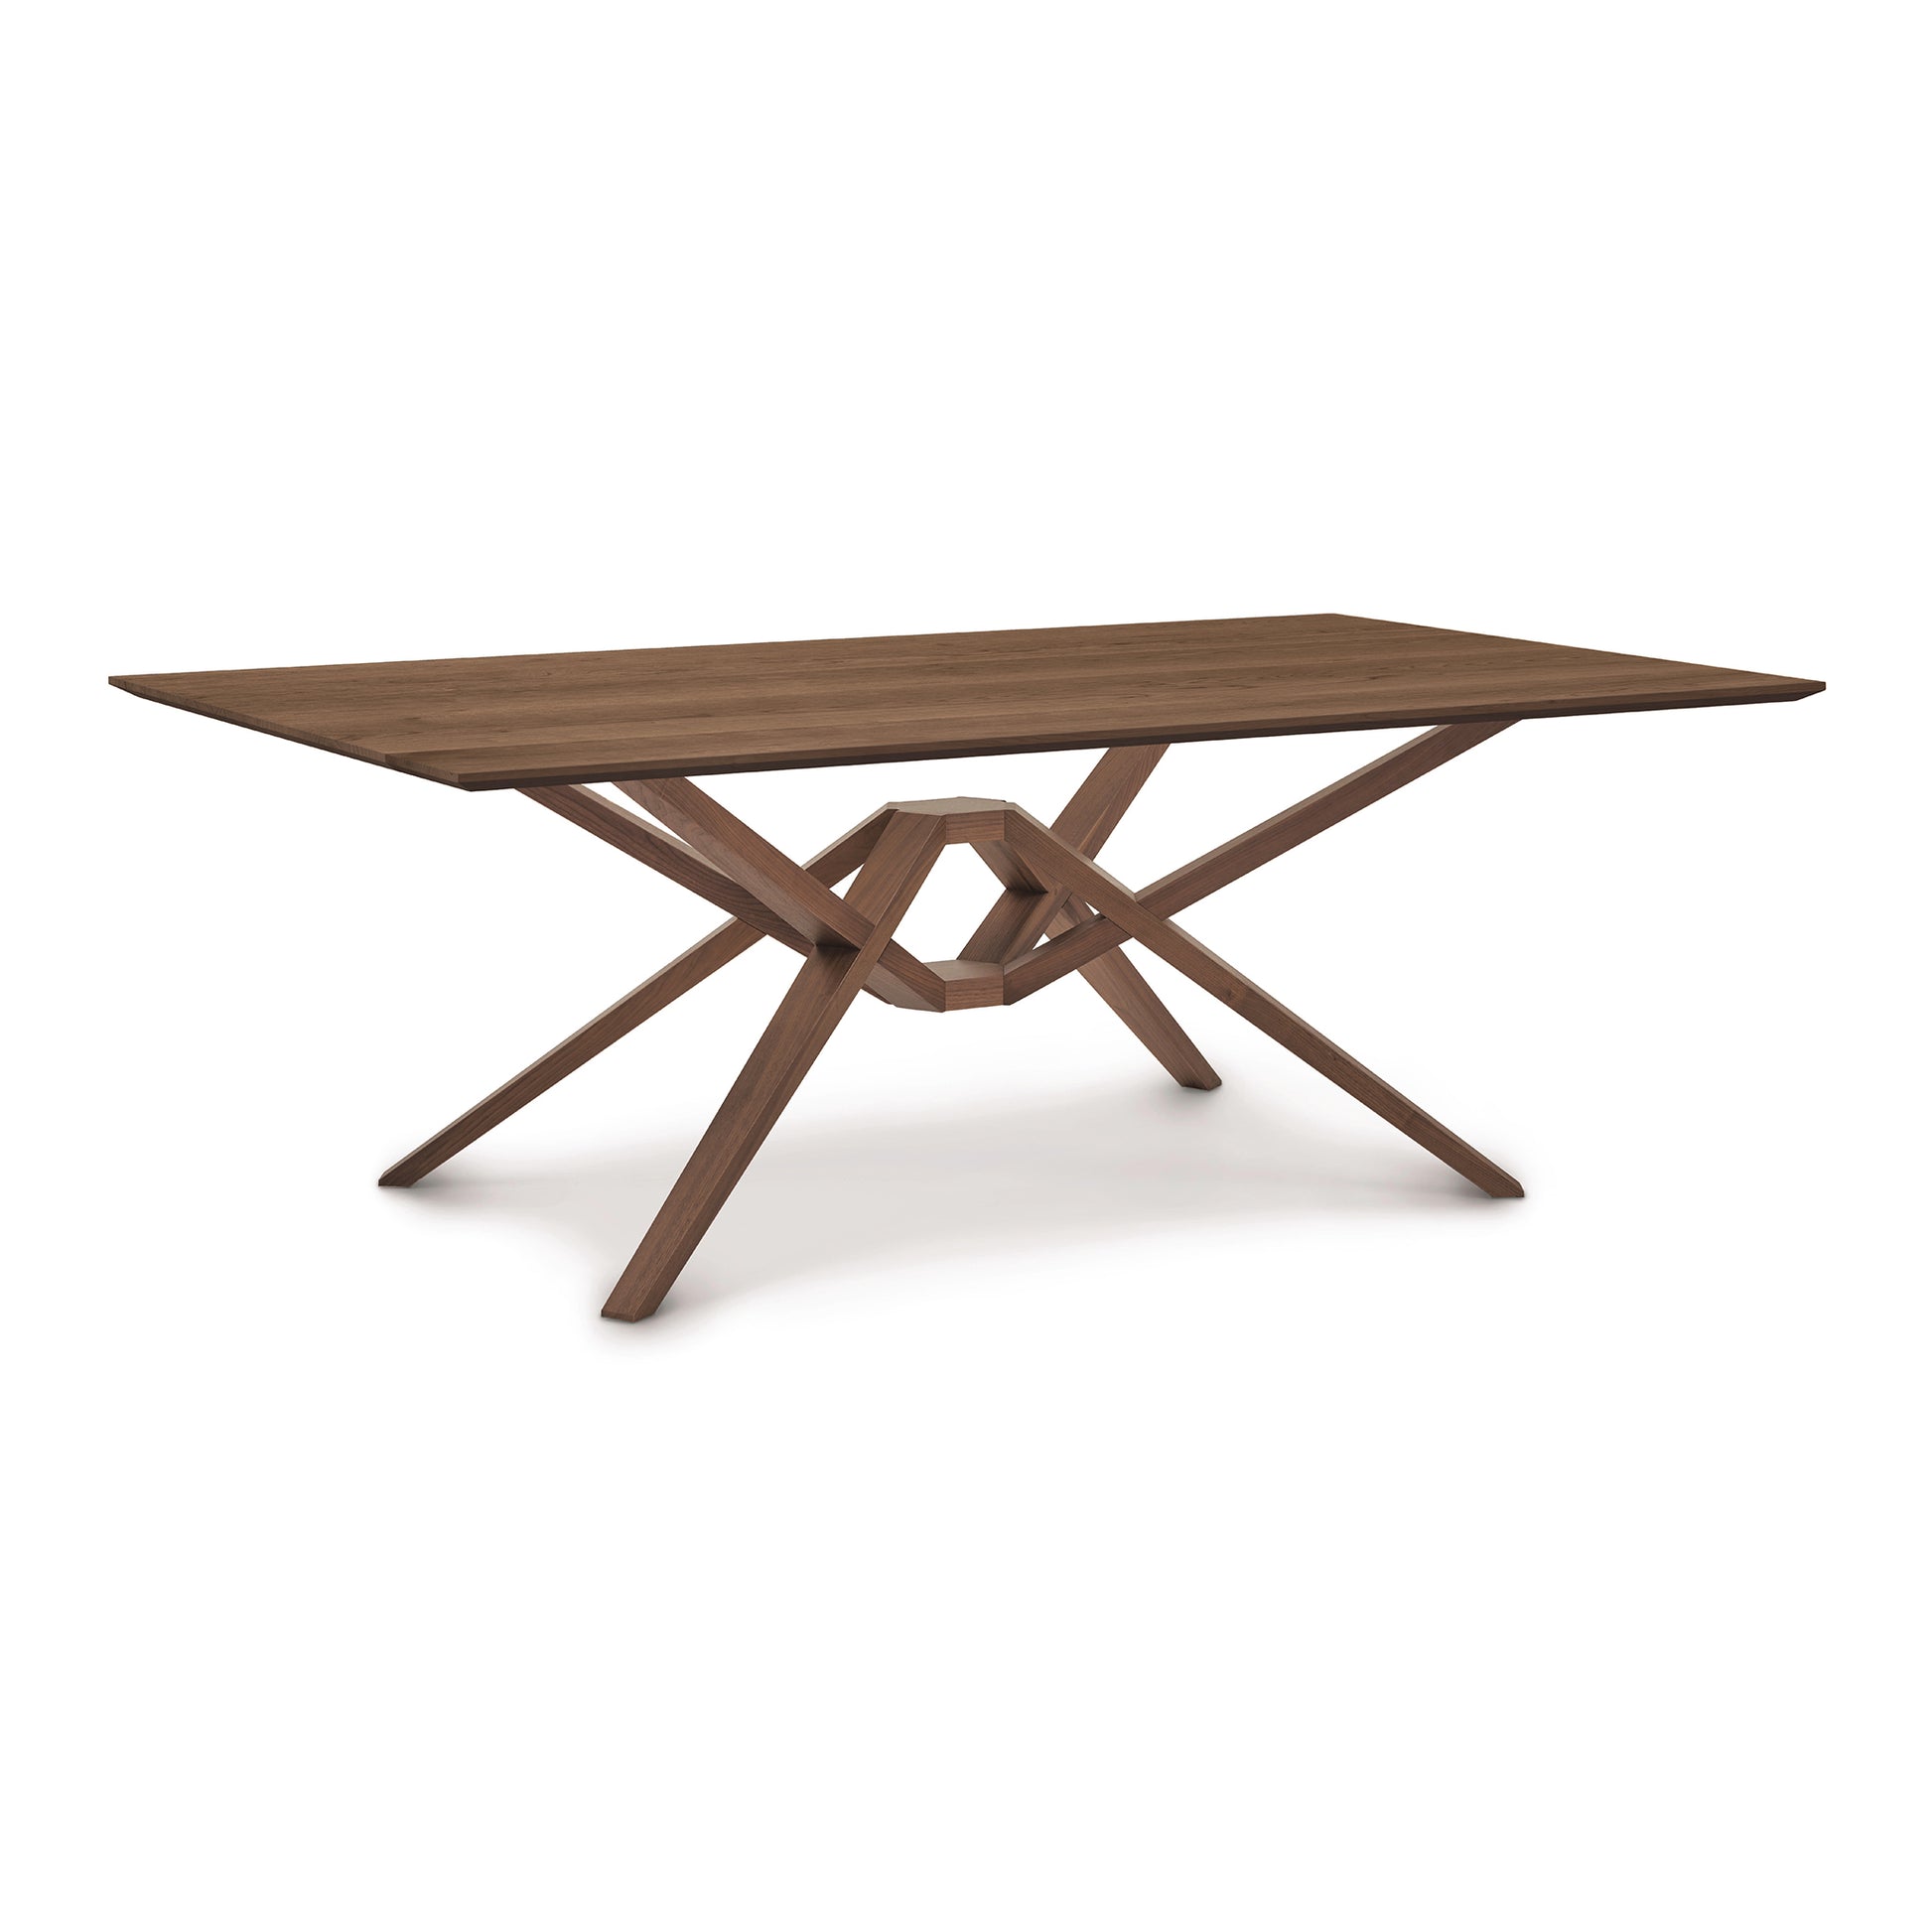 A Exeter Solid Top Dining Table from Copeland Furniture with a modern design and wooden base.